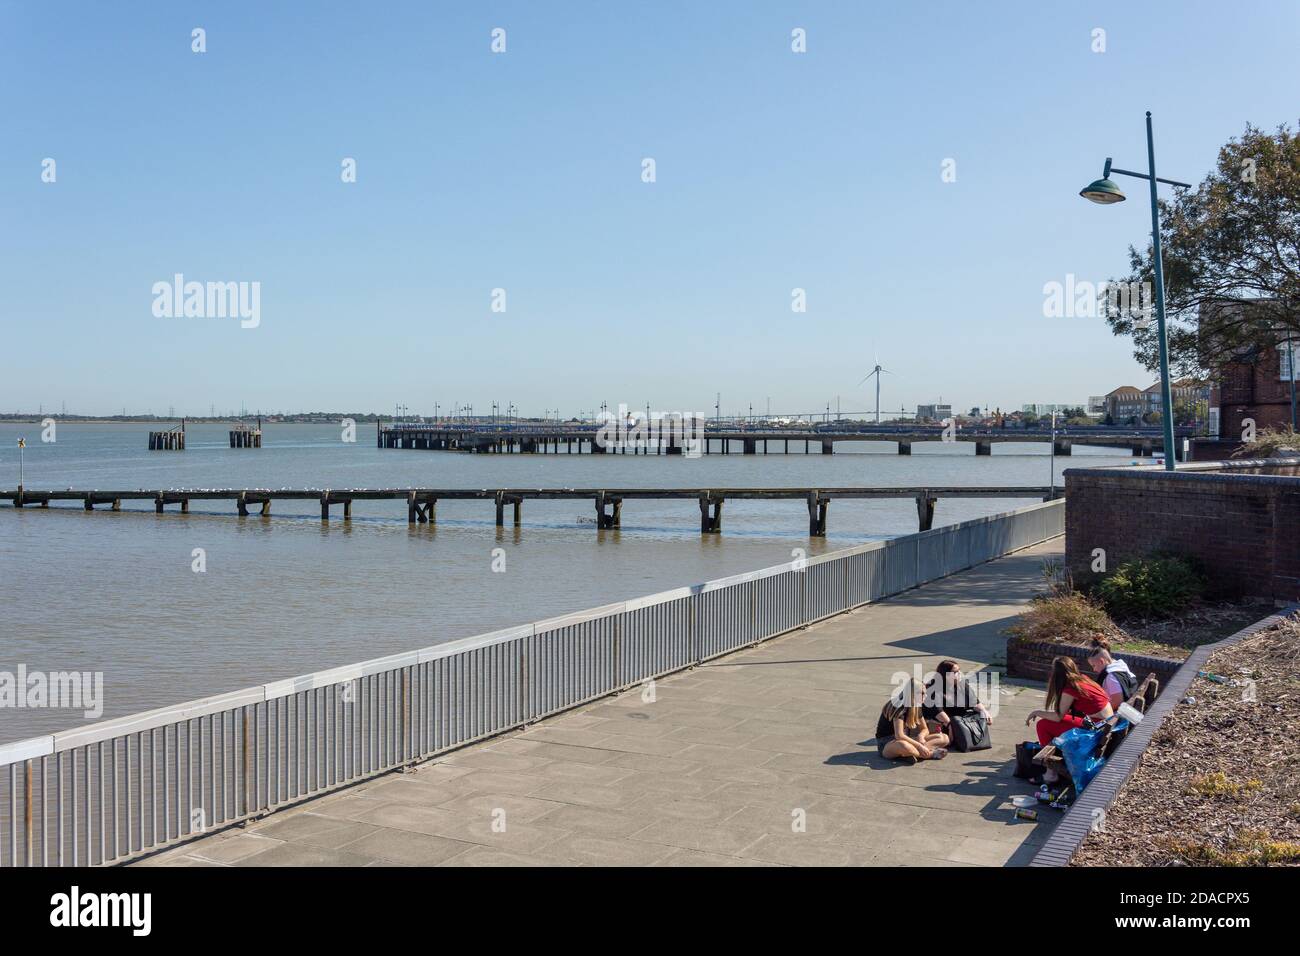 William Cory Promenade and River Thames from Riverside Gardens, Erith, London Borough of Bexley, Greater London, England, United Kingdom Stock Photo